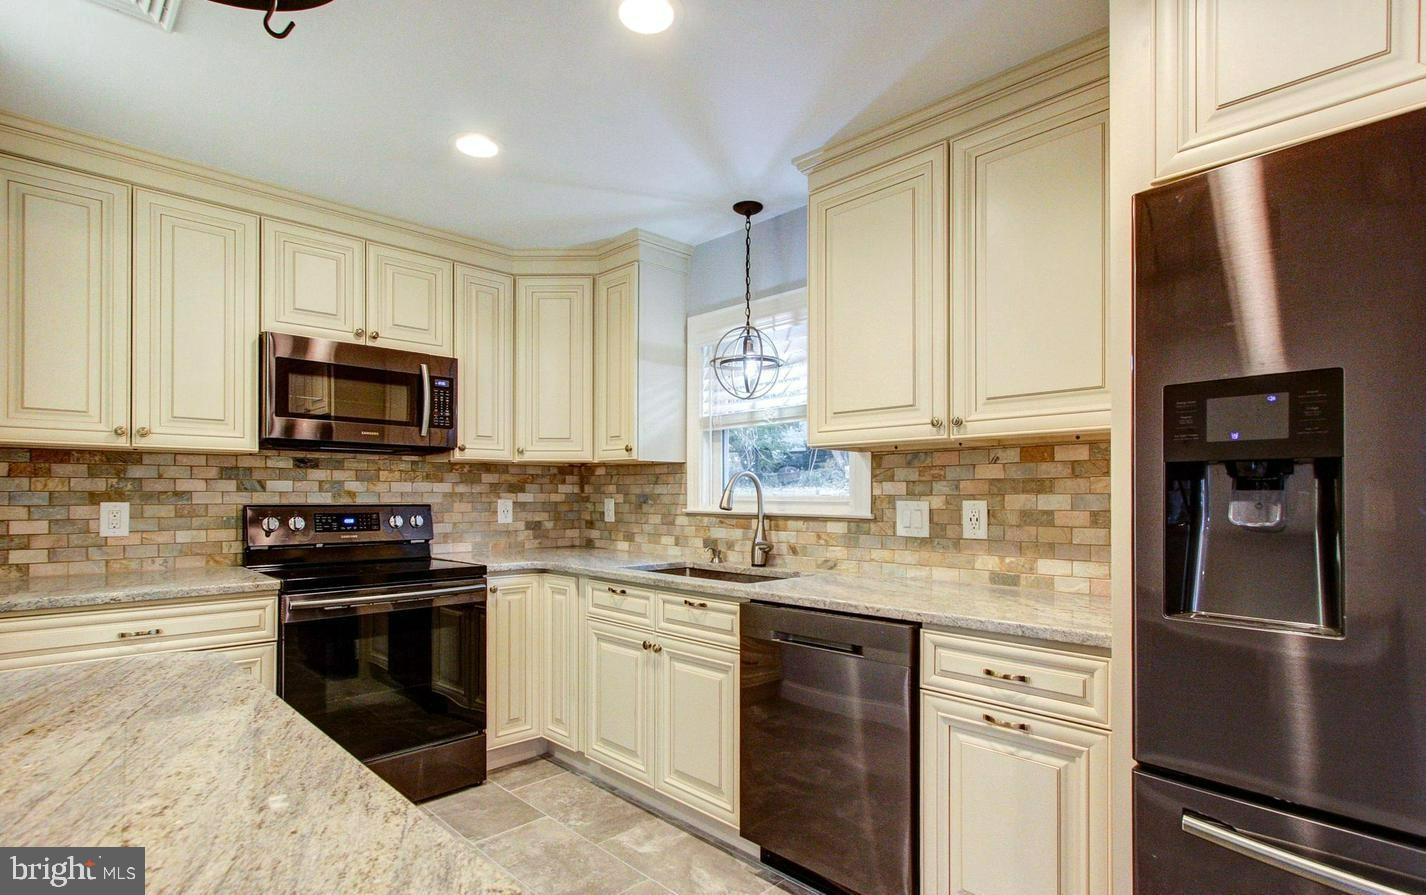 a kitchen with granite countertop a refrigerator stove and microwave